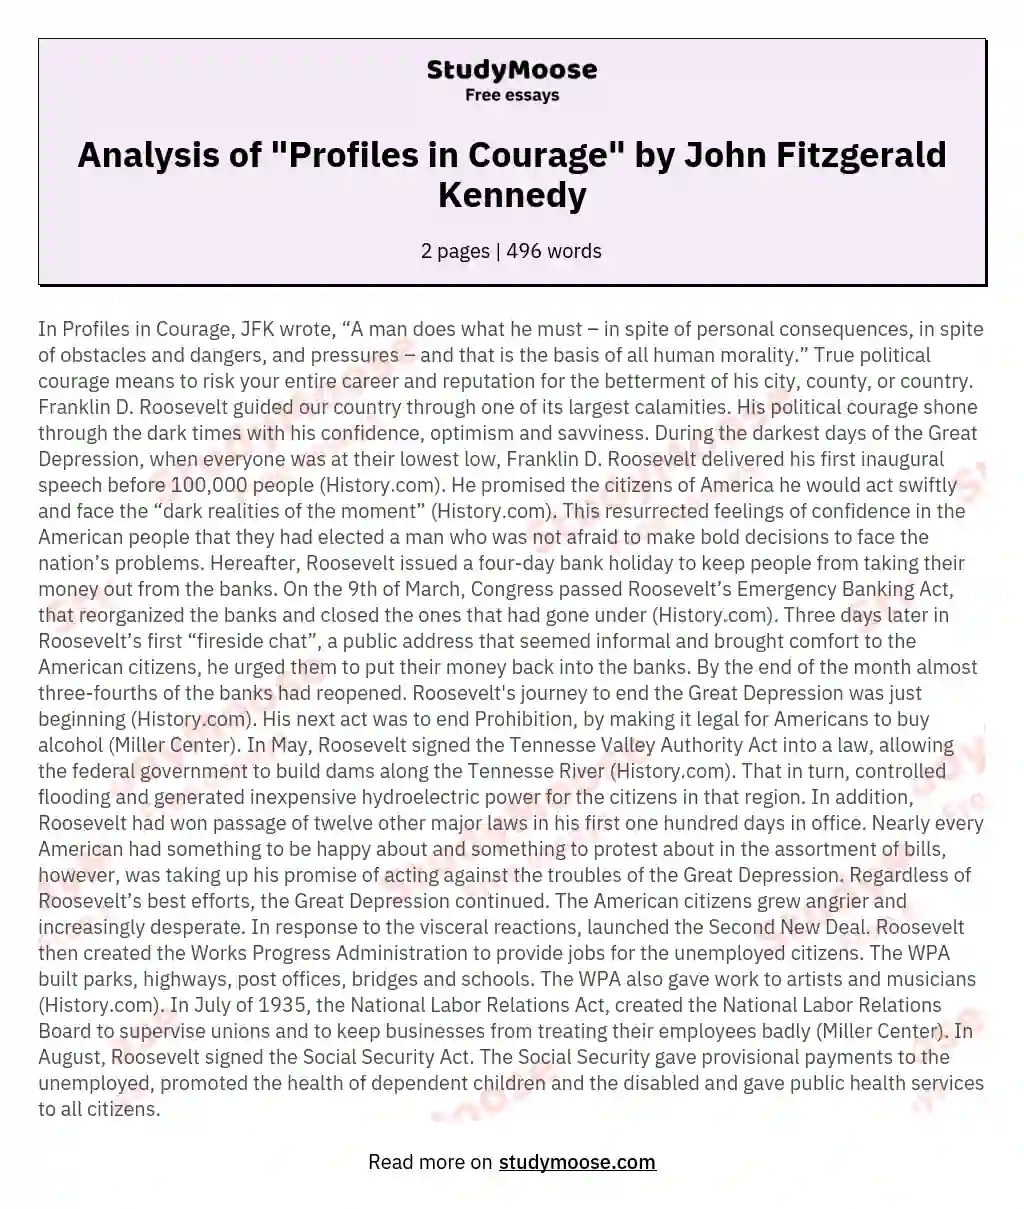 Analysis of "Profiles in Courage" by John Fitzgerald Kennedy essay